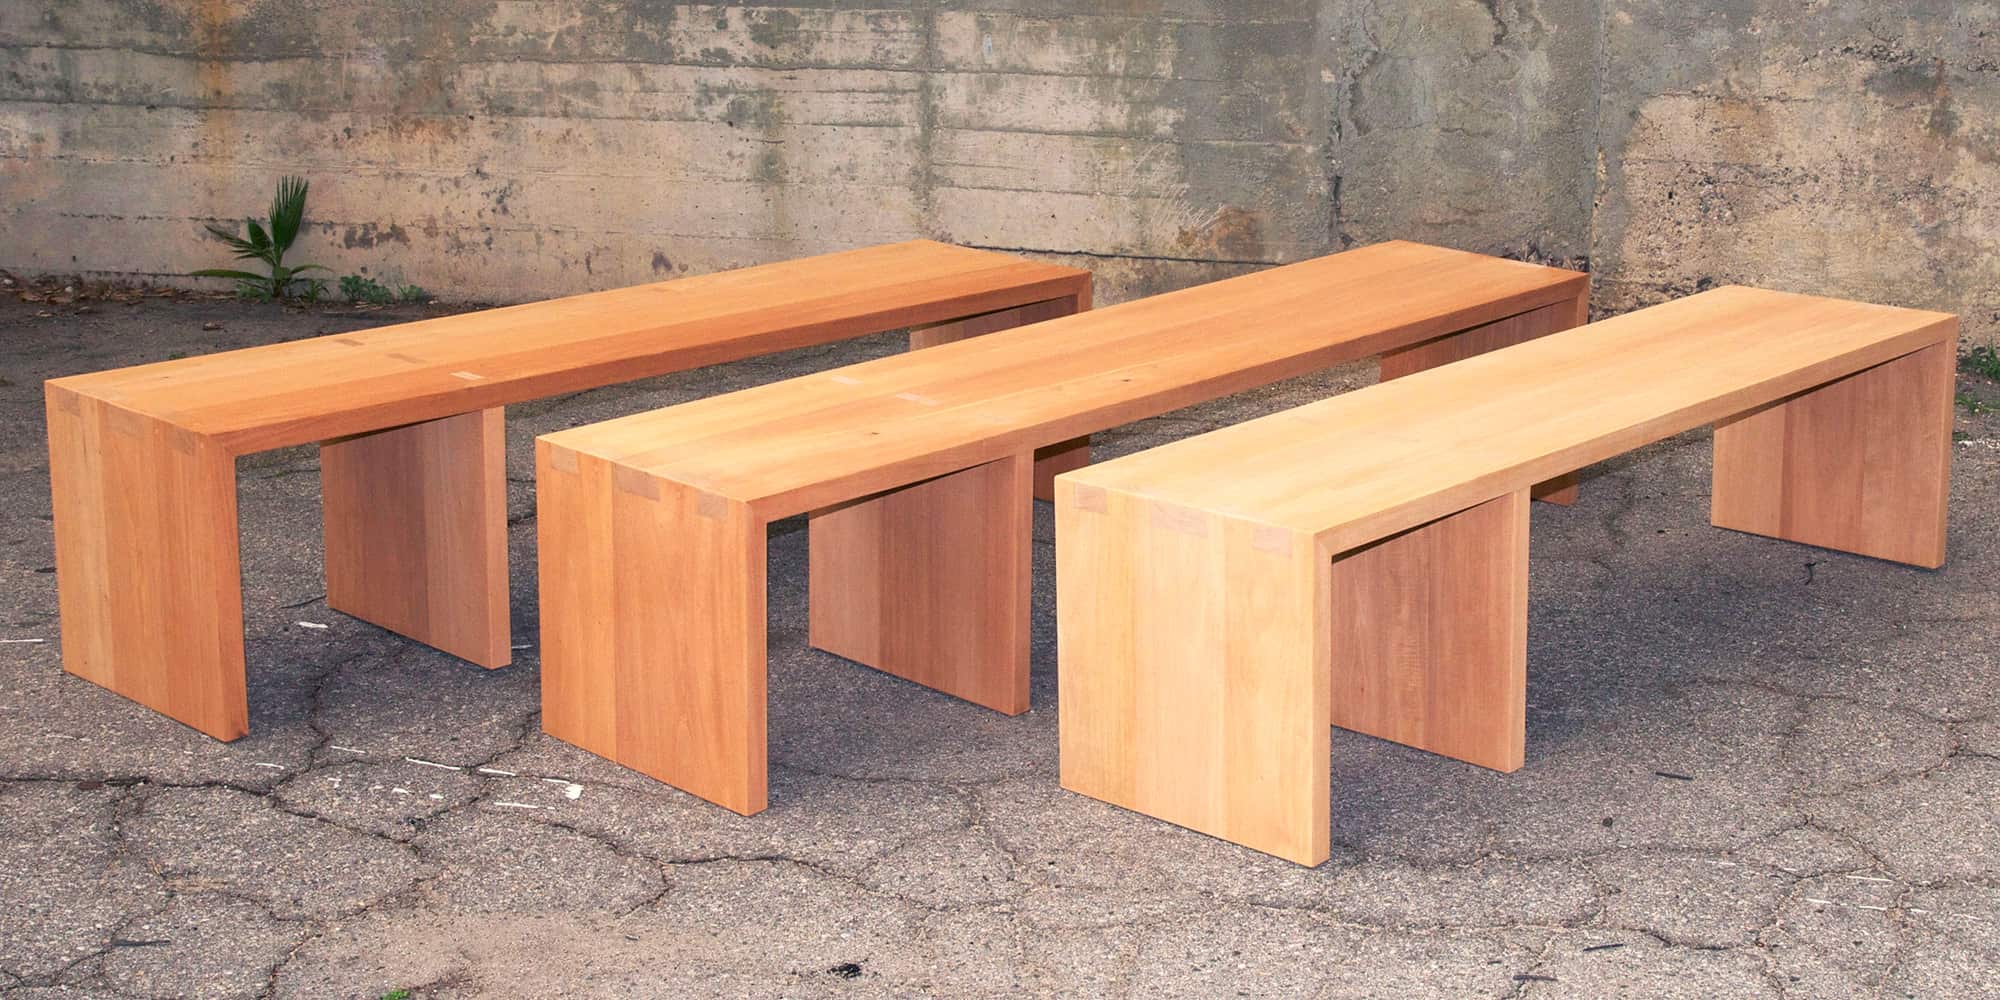 Custom Wooden Seats, Benches & Chairs | Offerman Woodshop